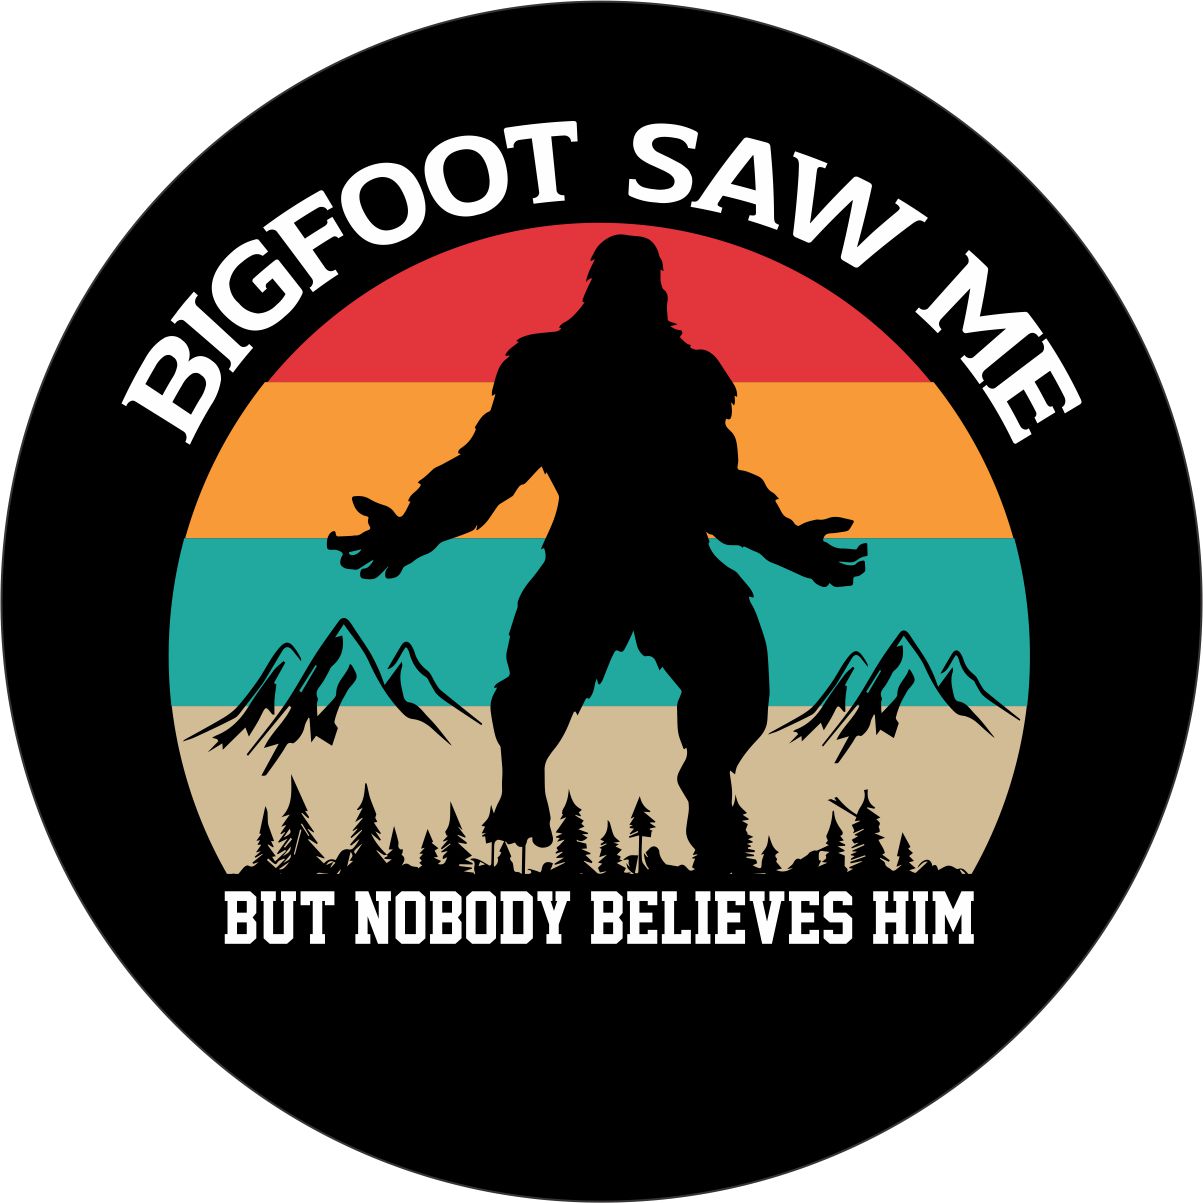 Mock up design of a vinyl spare tire cover with red, orange, turquoise, & tan stripes. Plus the silhouette of bigfoot or sasquatch and the saying that bigfoot saw me but nobody believe him.